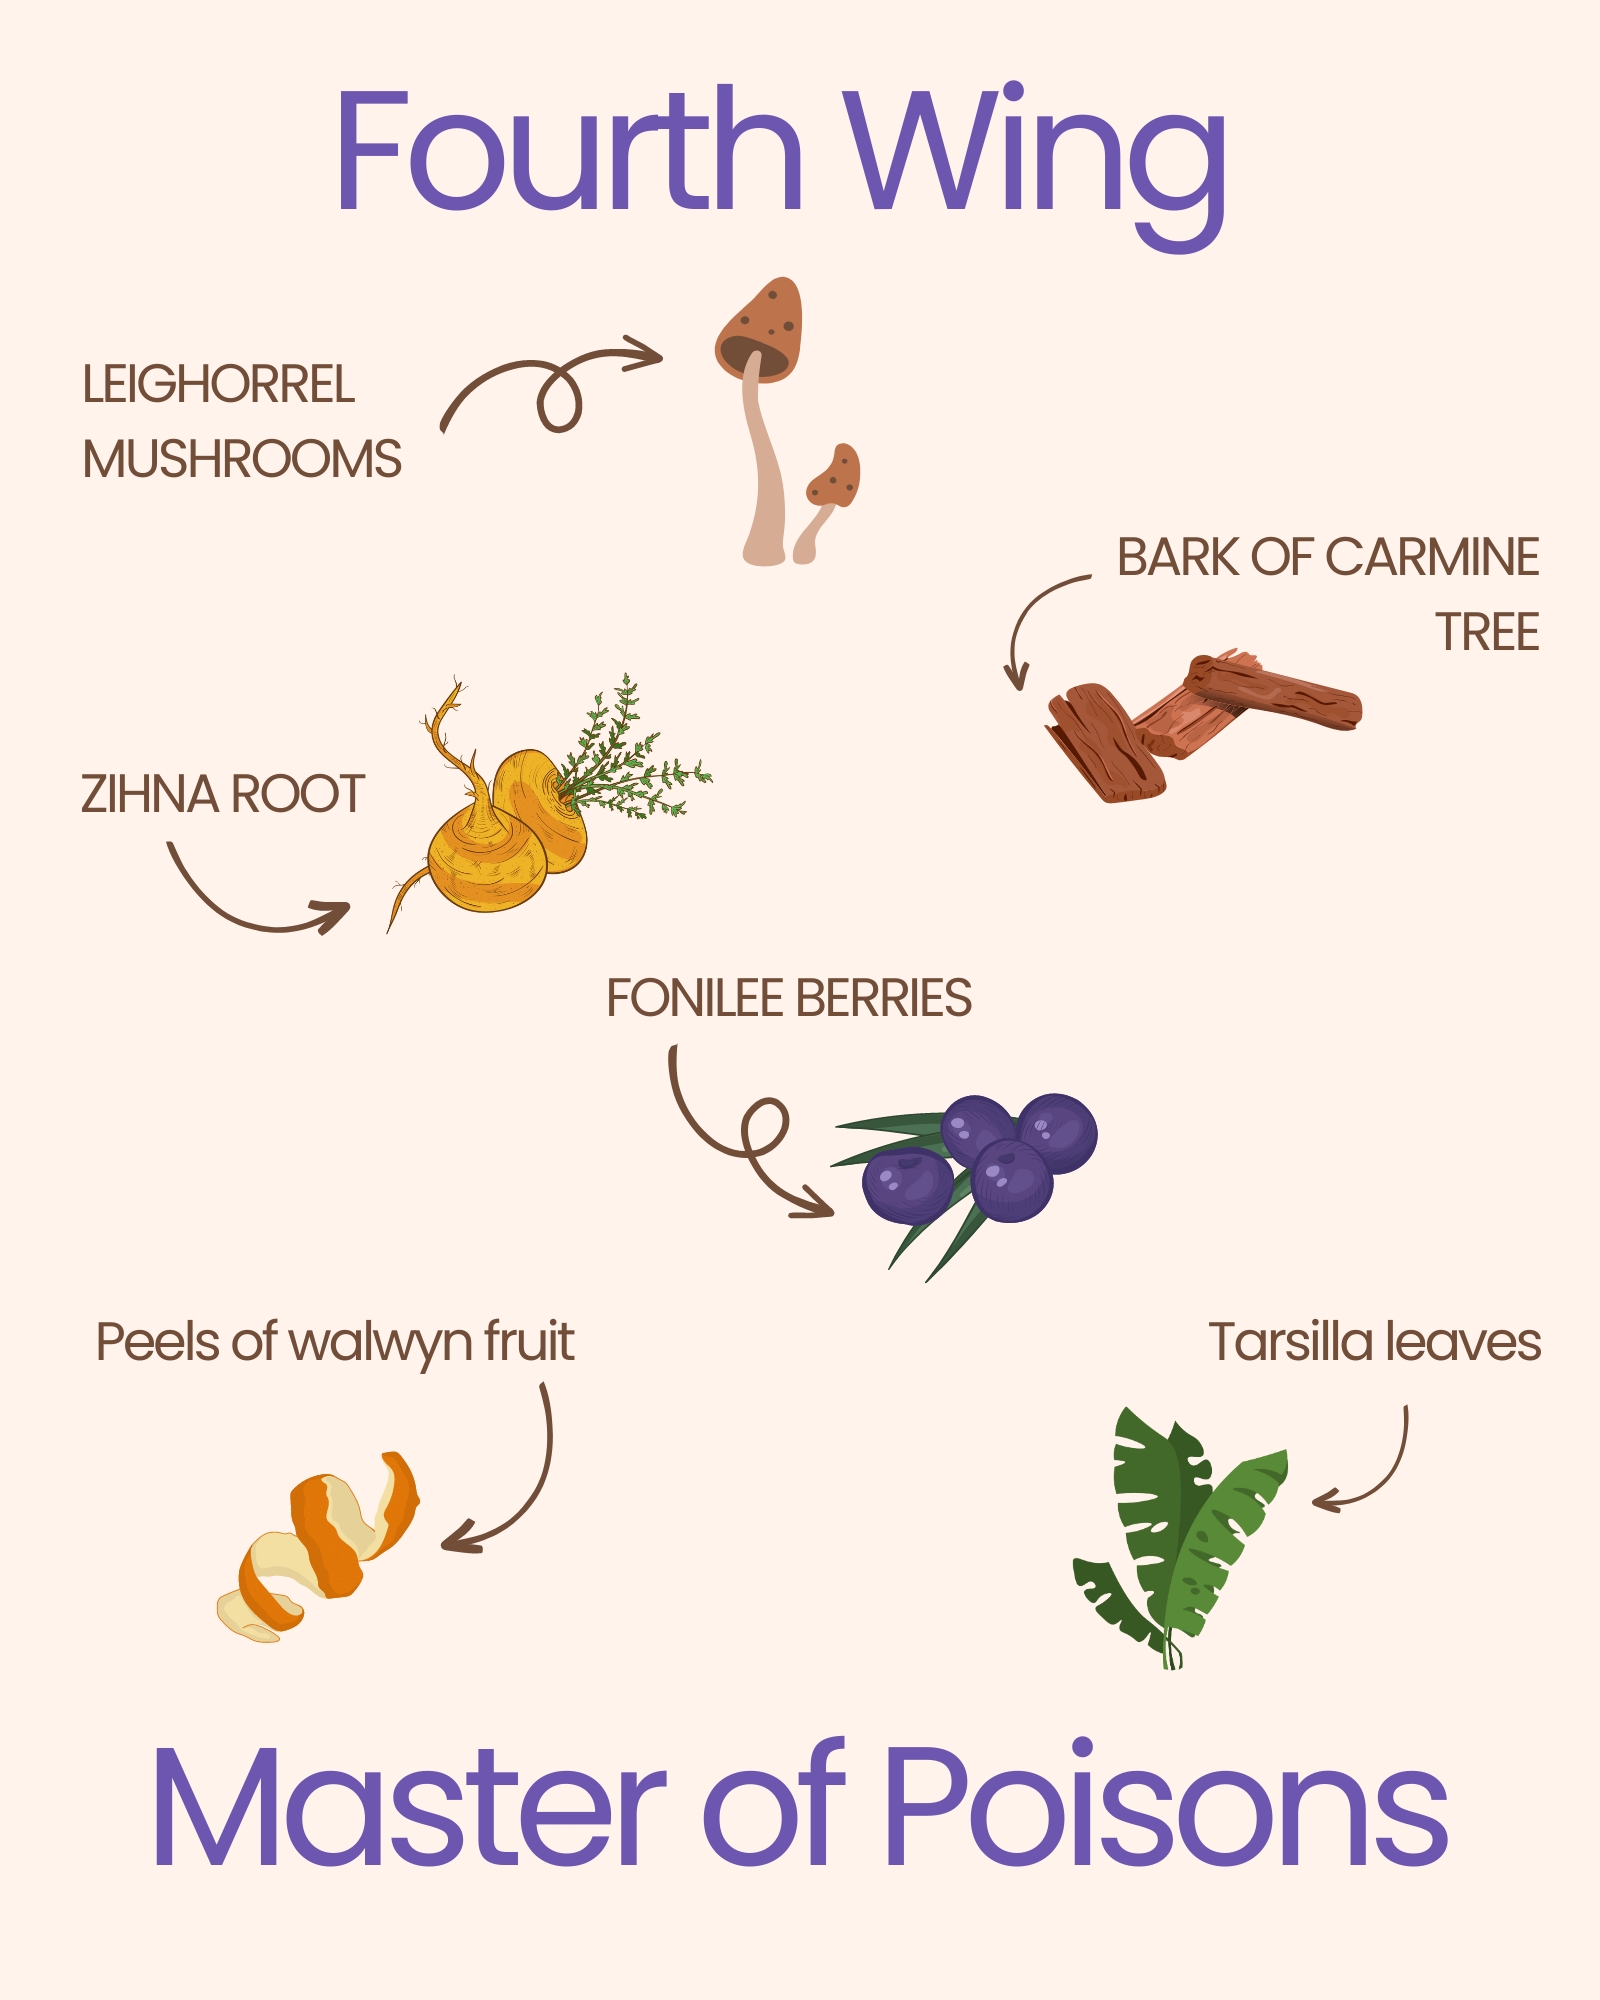 Types of poison in Fourth Wing by Rebecca Yarros